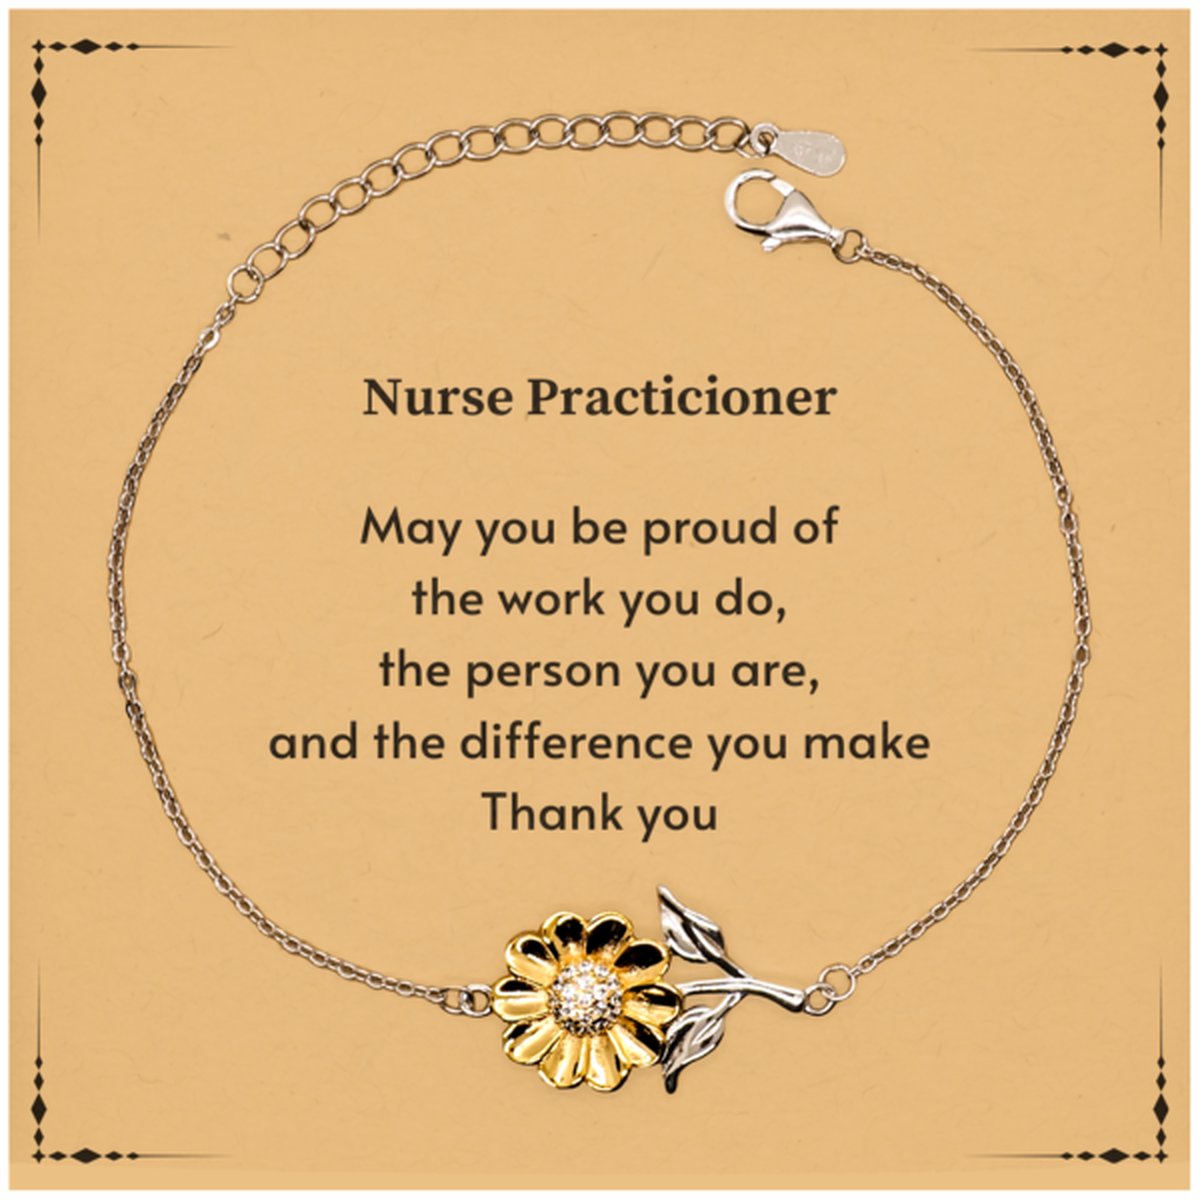 Heartwarming Sunflower Bracelet Retirement Coworkers Gifts for Nurse Practicioner, Nurse Practicioner May You be proud of the work you do, the person you are Gifts for Boss Men Women Friends